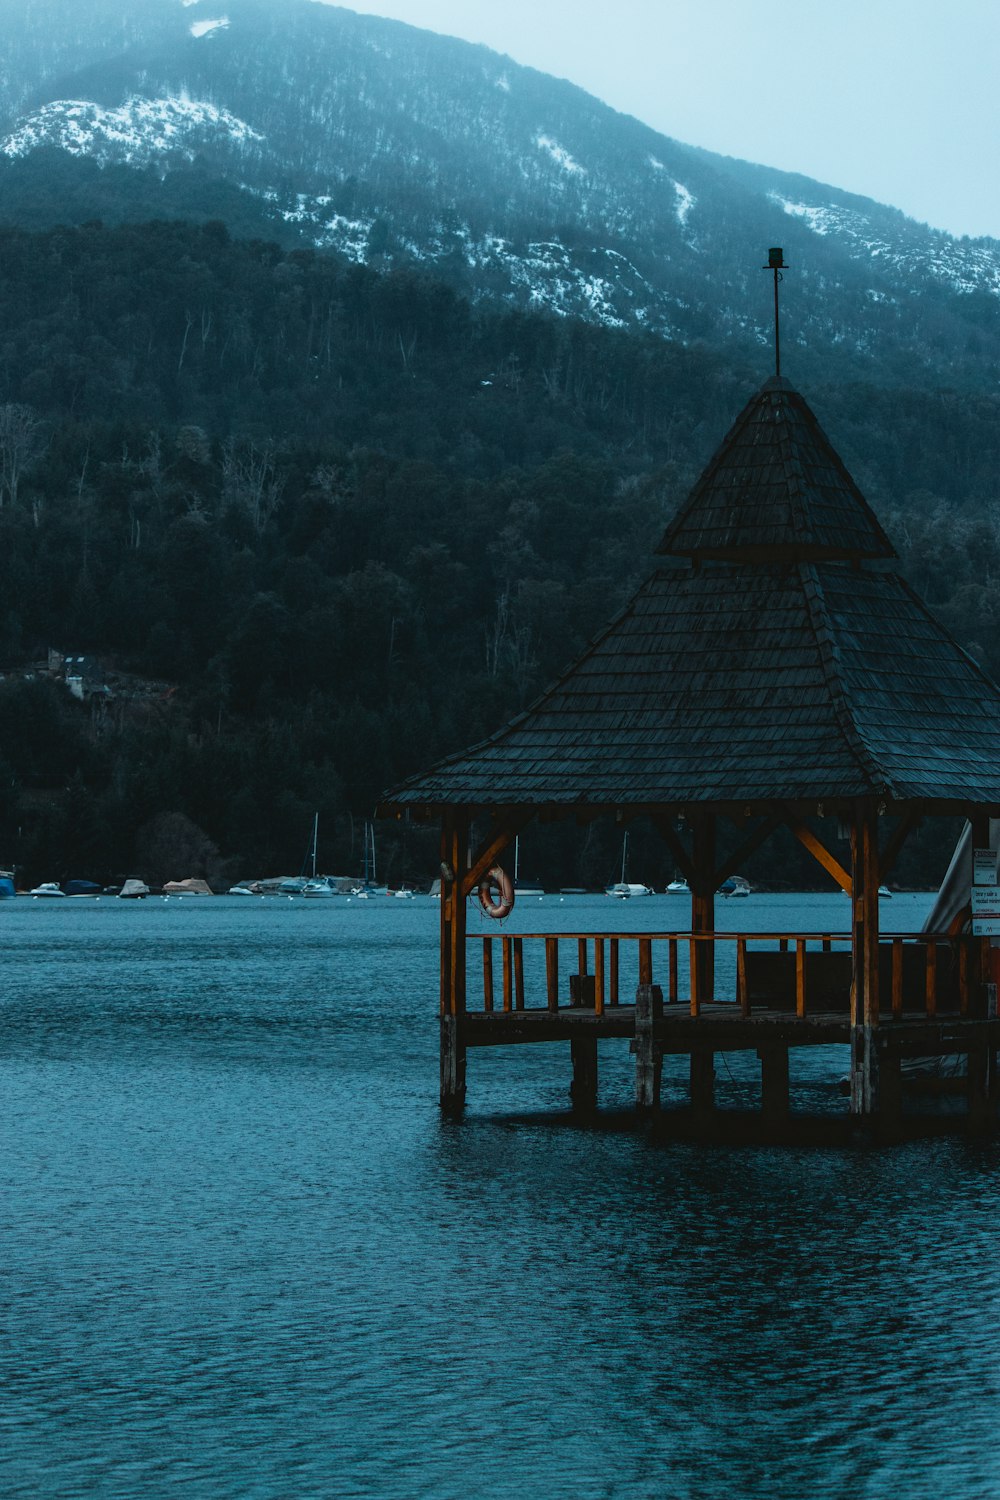 a gazebo in the middle of a body of water